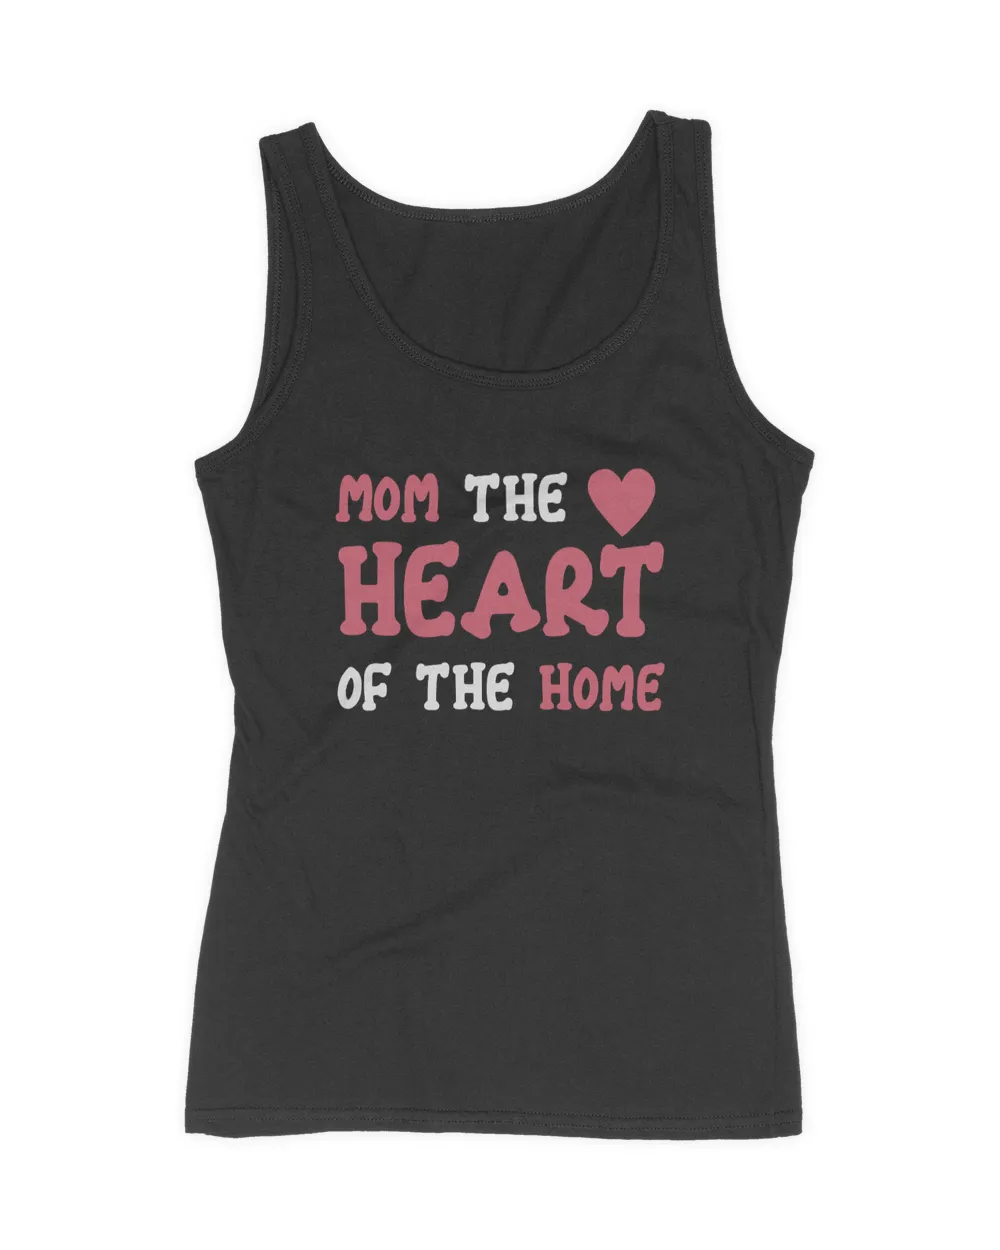 Mom the heart of the home t shirt